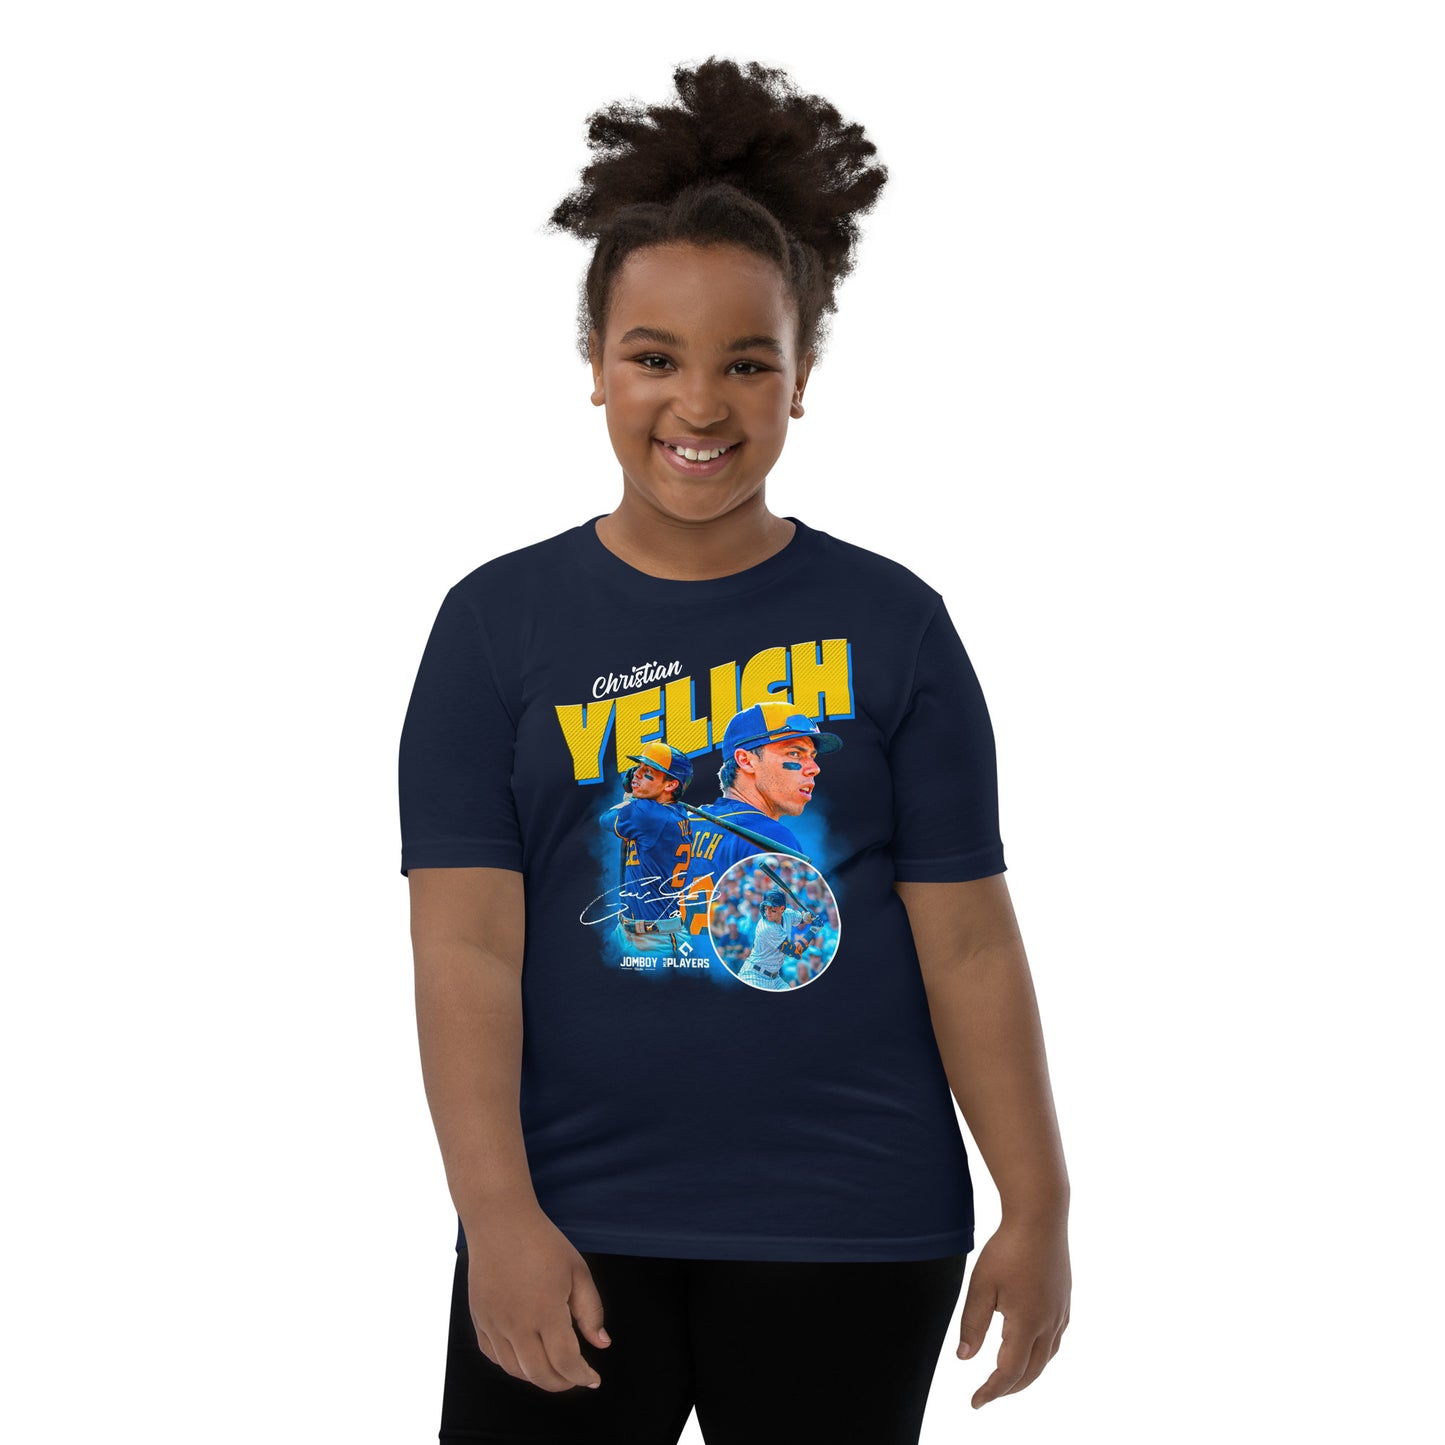 Christian Yelich Signature Series | Youth T-Shirt